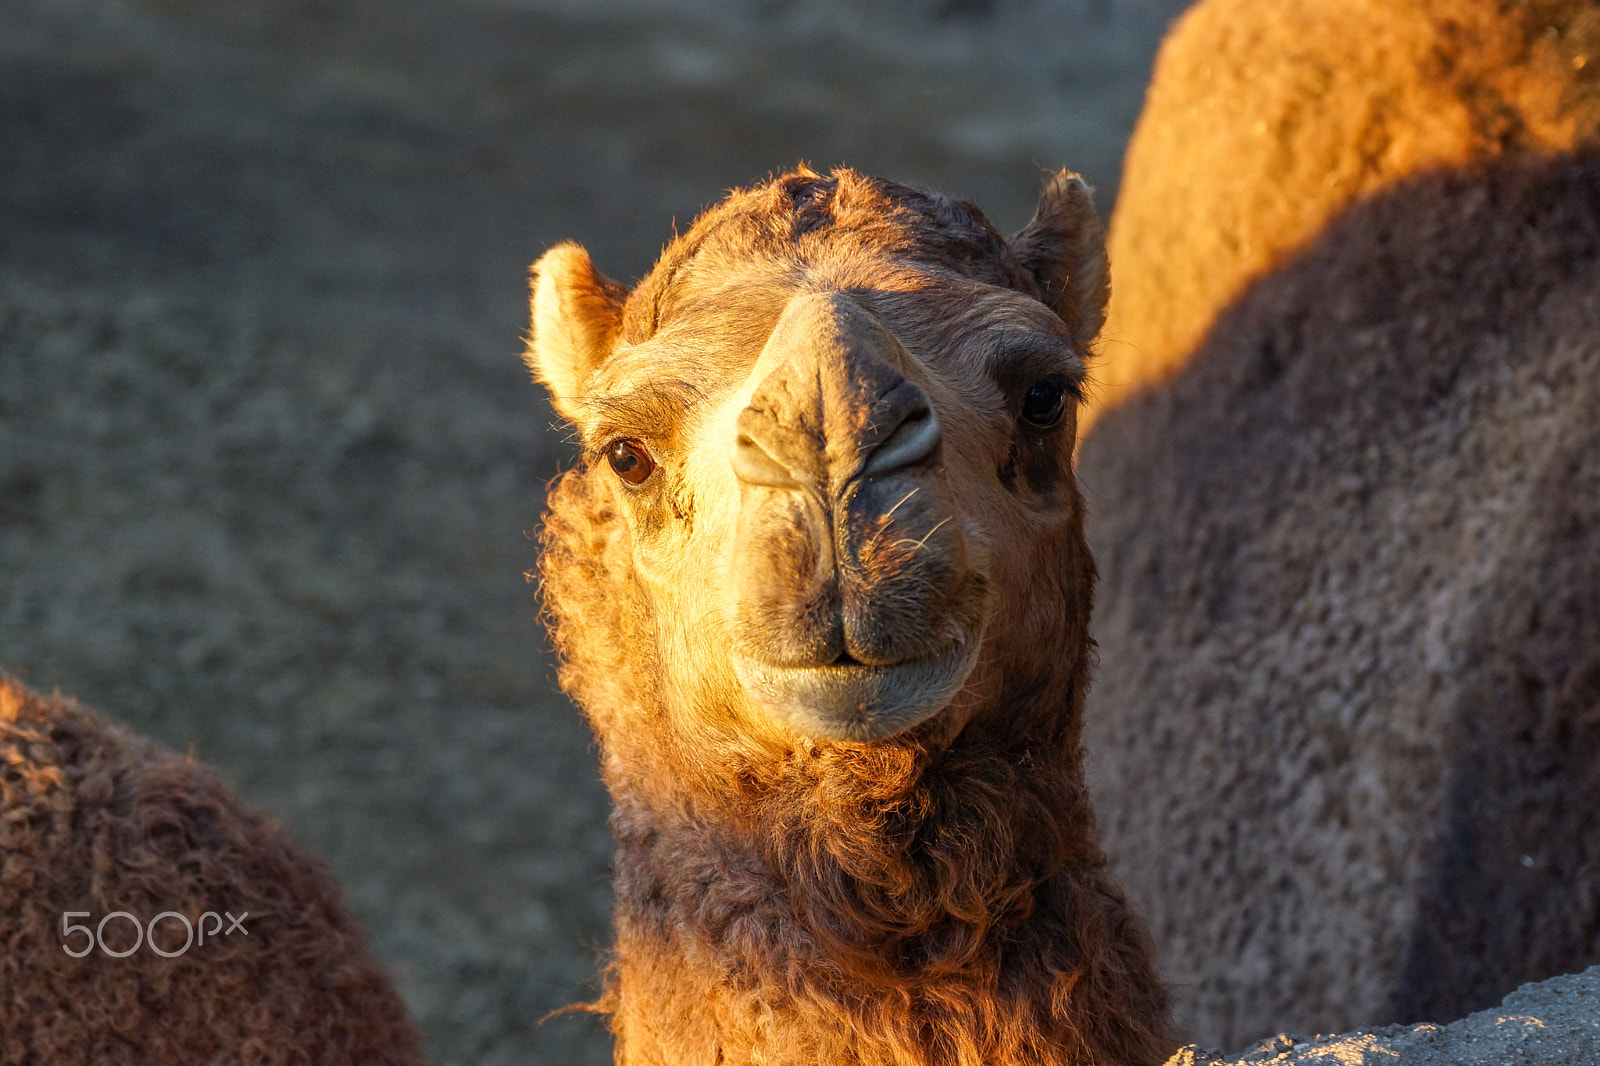 Sony SLT-A77 sample photo. A camel making eye contact at the san diego zoo in california during the golden hour. photography